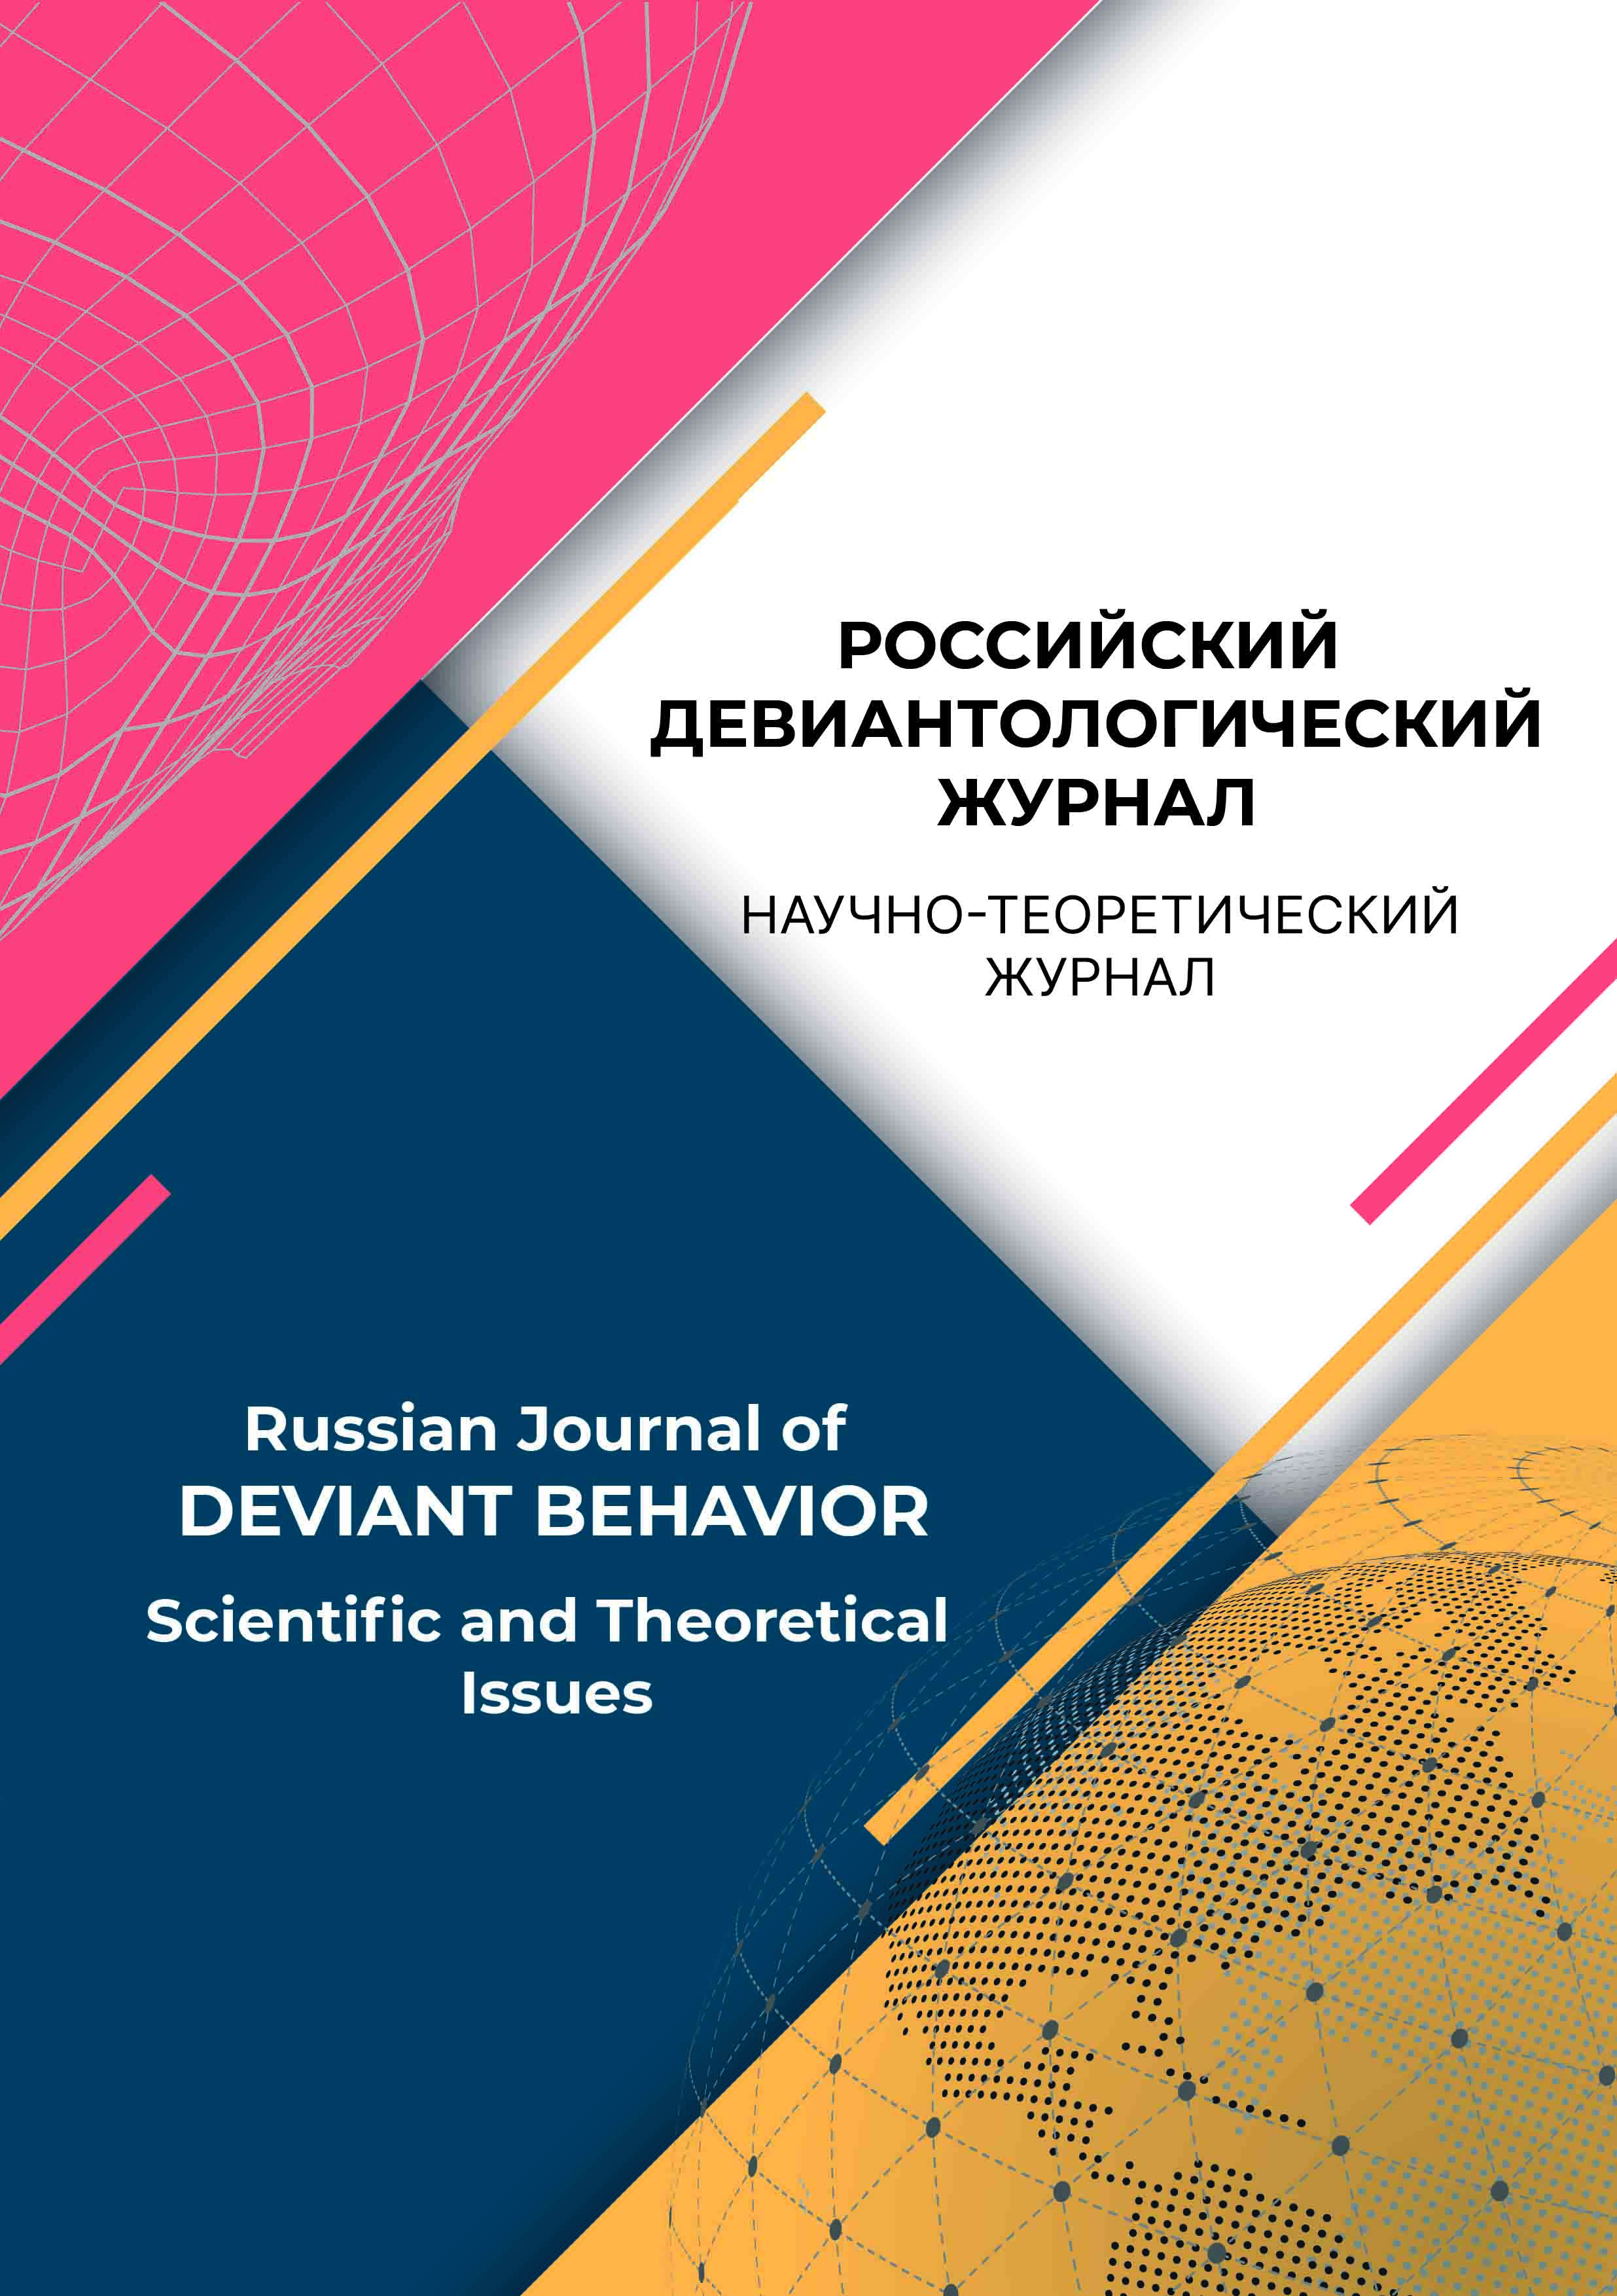                         Modern Russian deviantology: history, methodology, social challenges and current trends
            